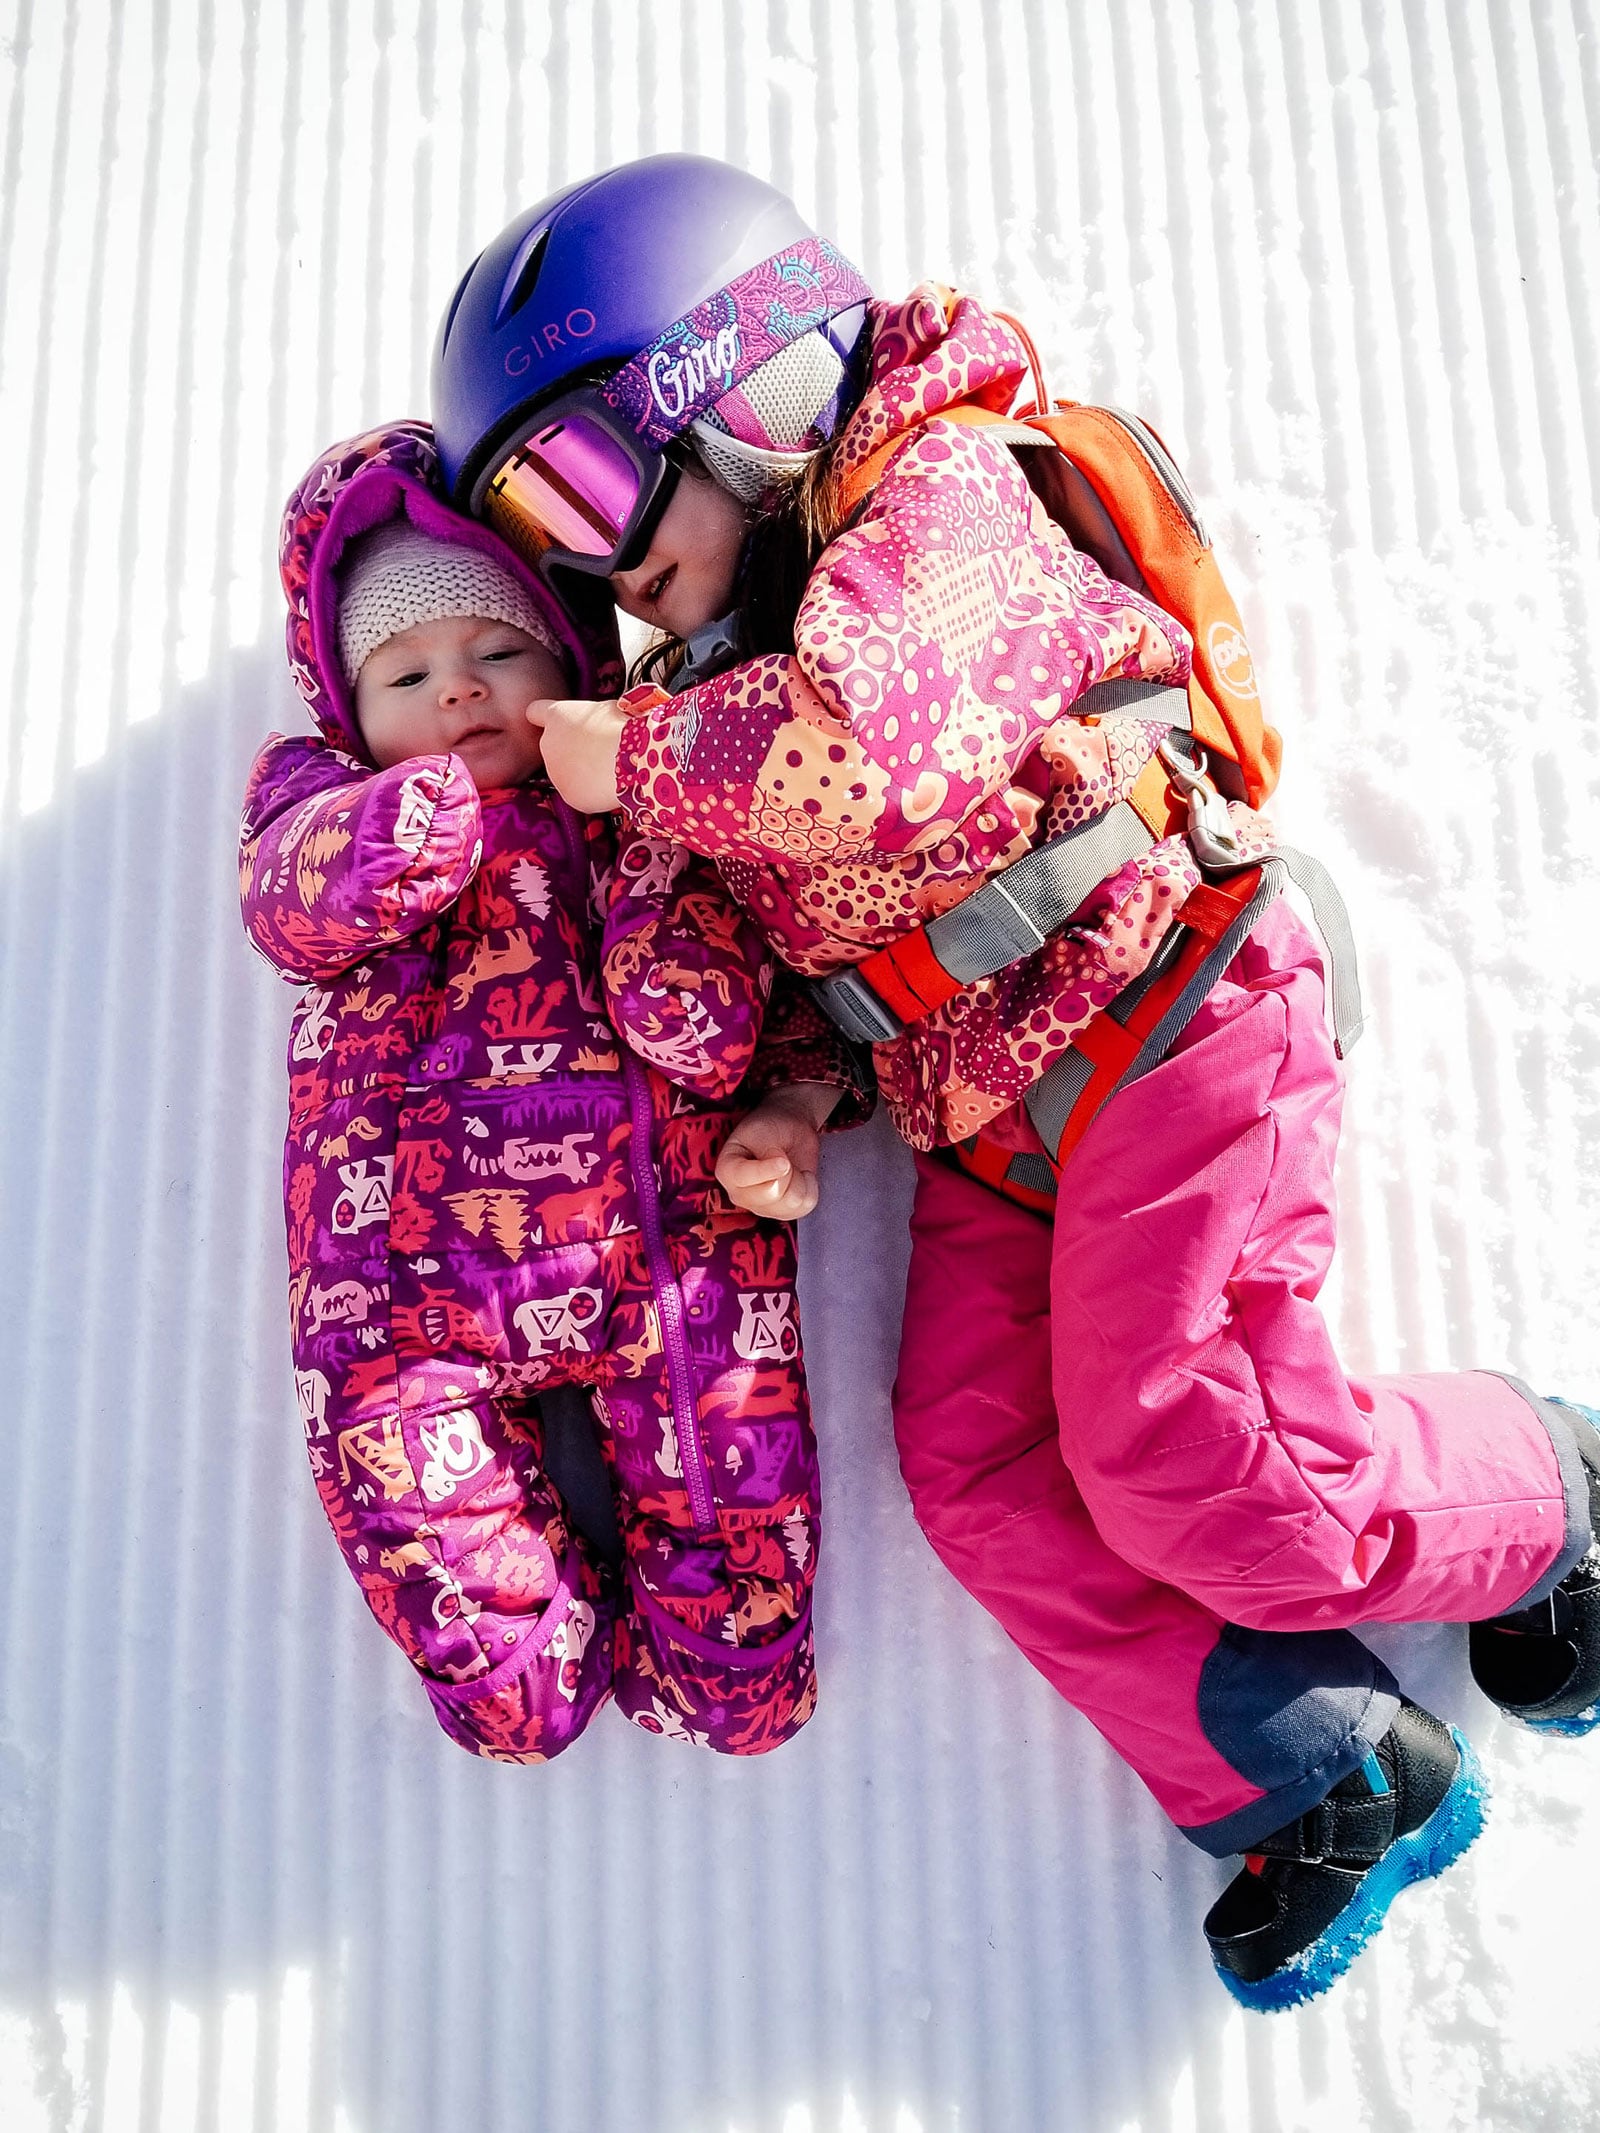 A baby and toddler lying in the snow together